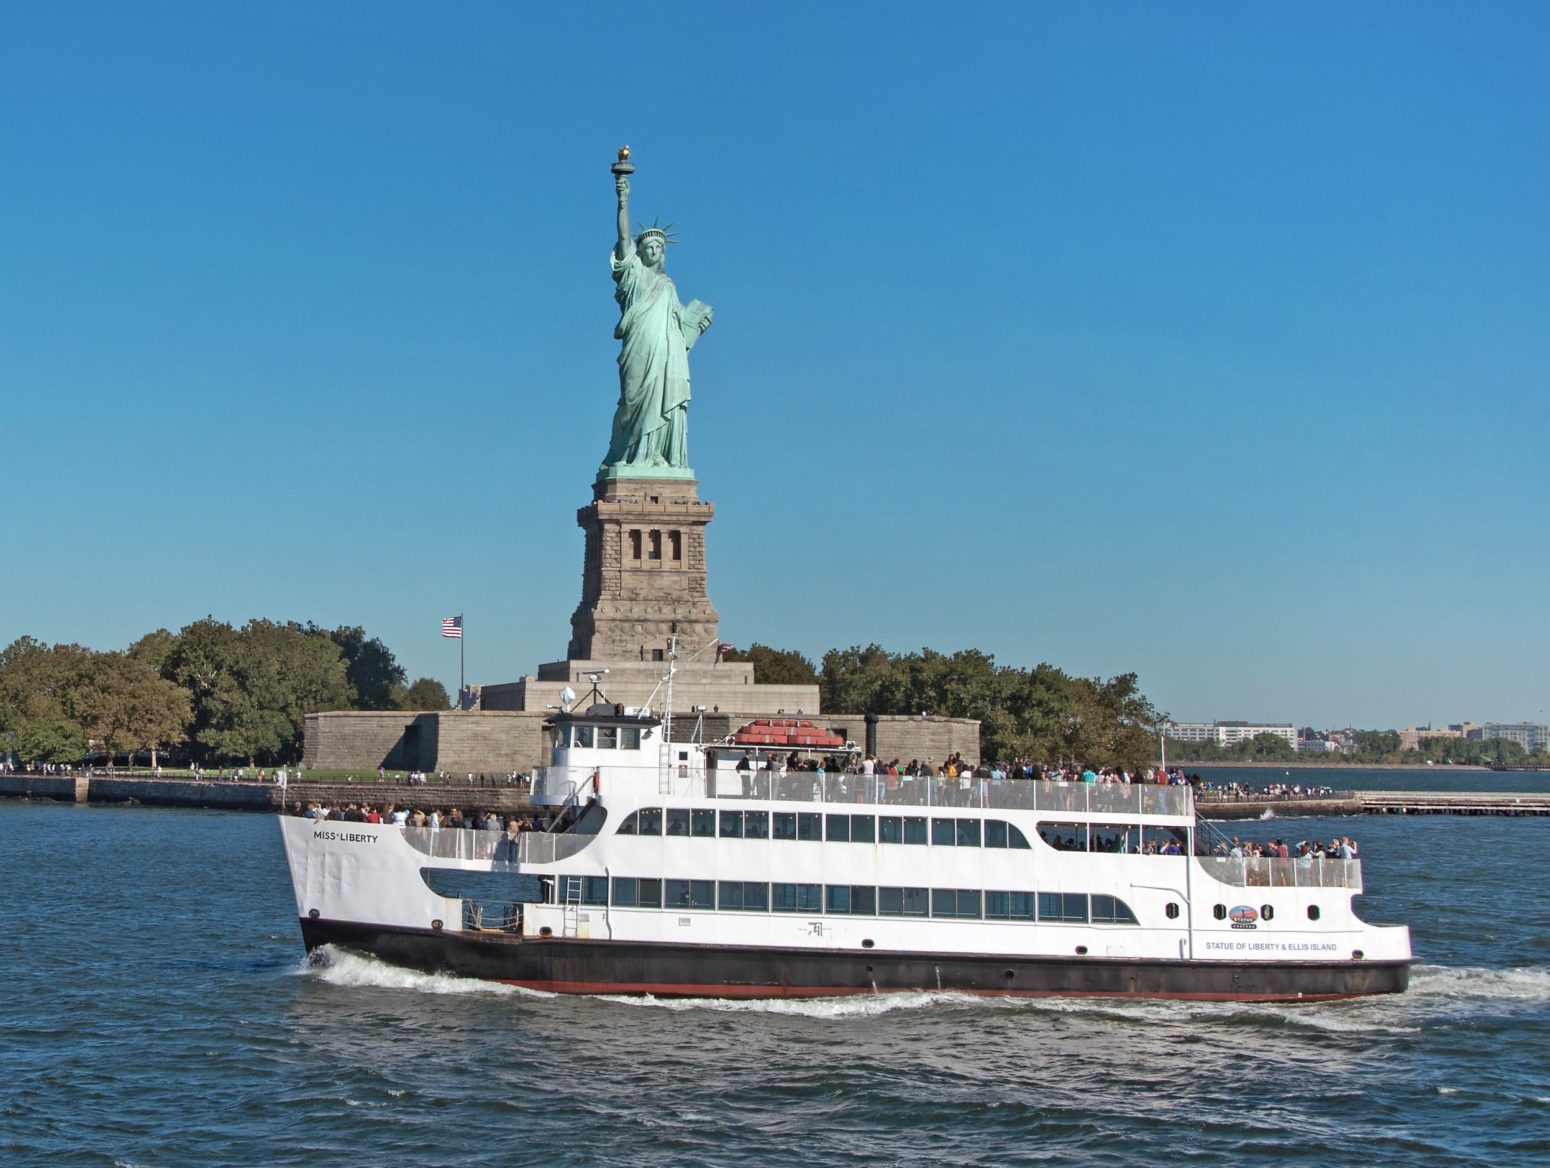 statue of liberty new jersey tickets